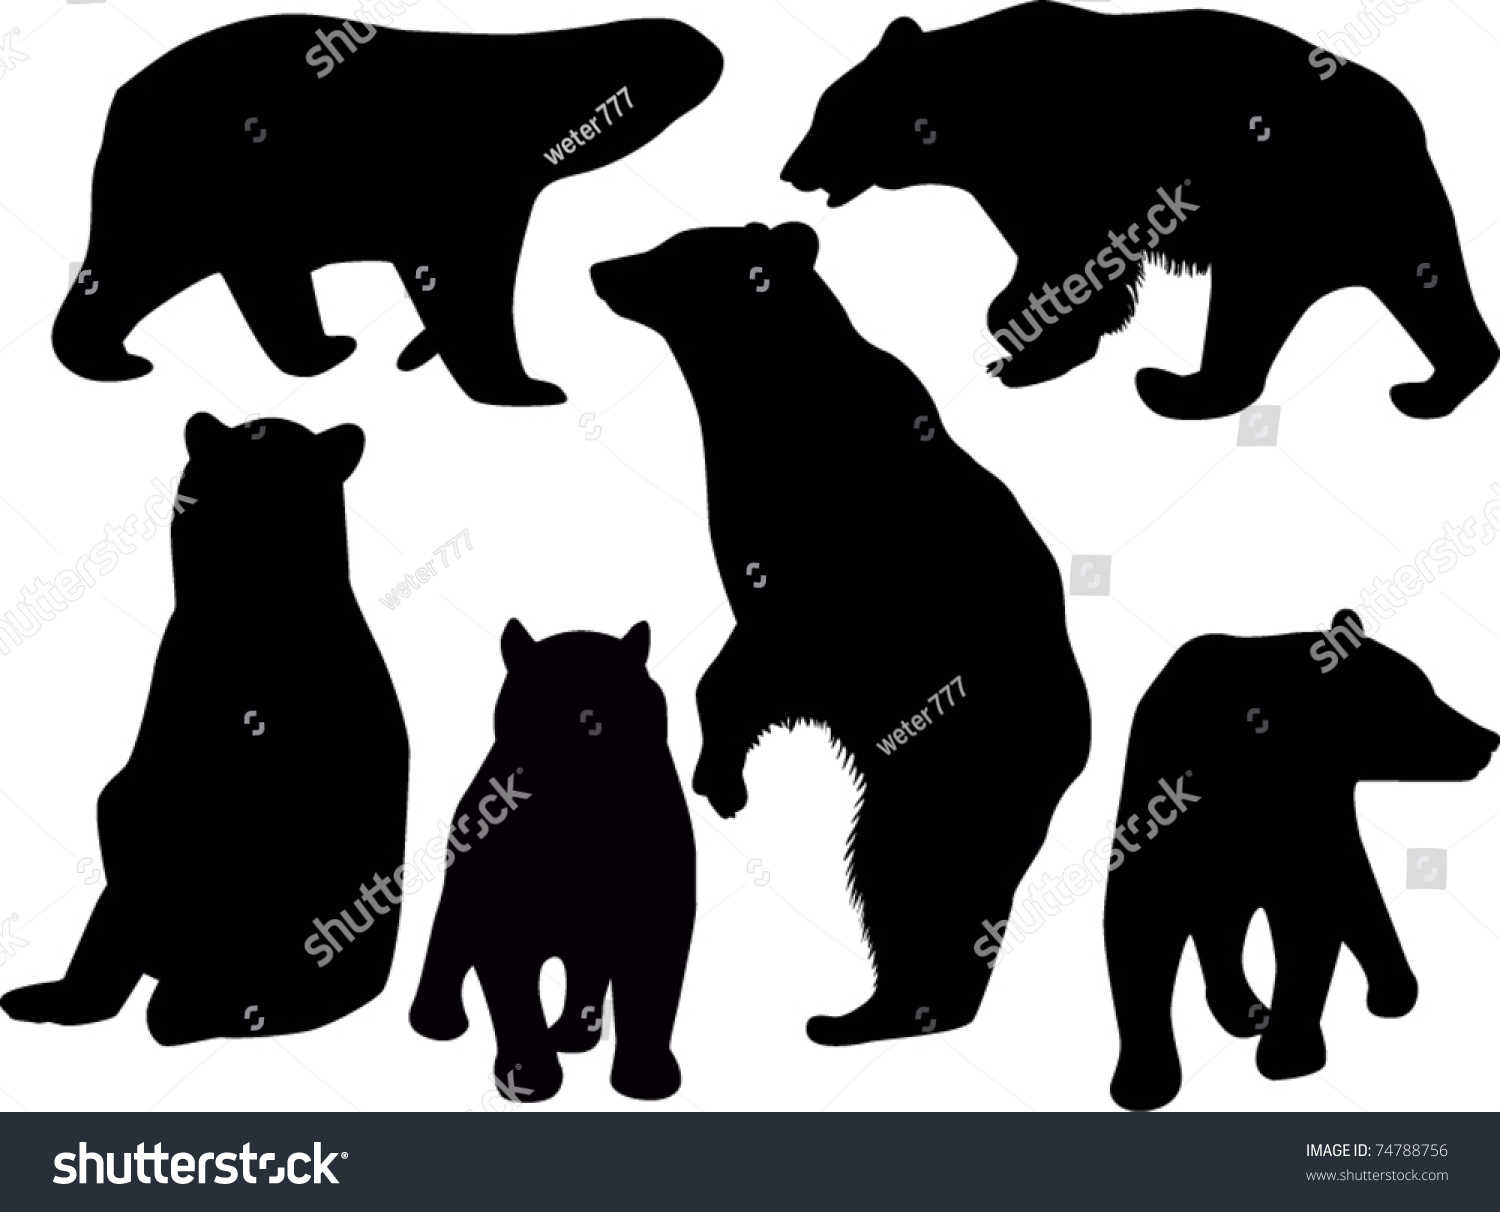 SVG of set of bears isolated on white background svg